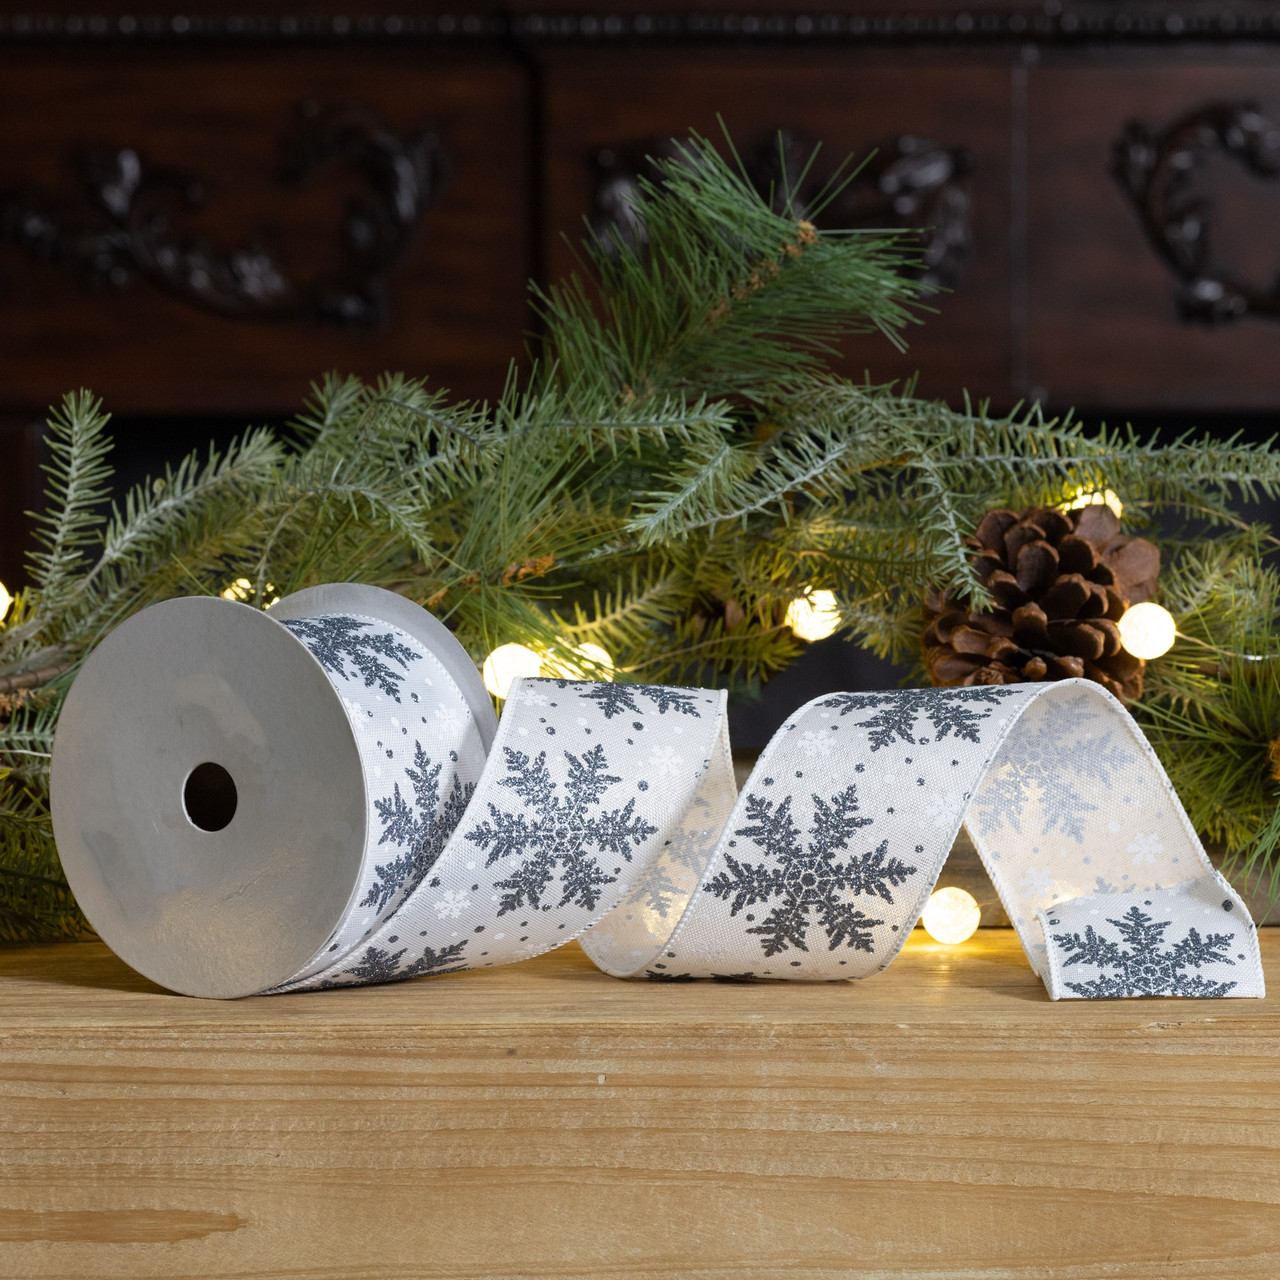 JAM Paper 2.5 x 10yd. Wired Snowflake Drifts Ribbon